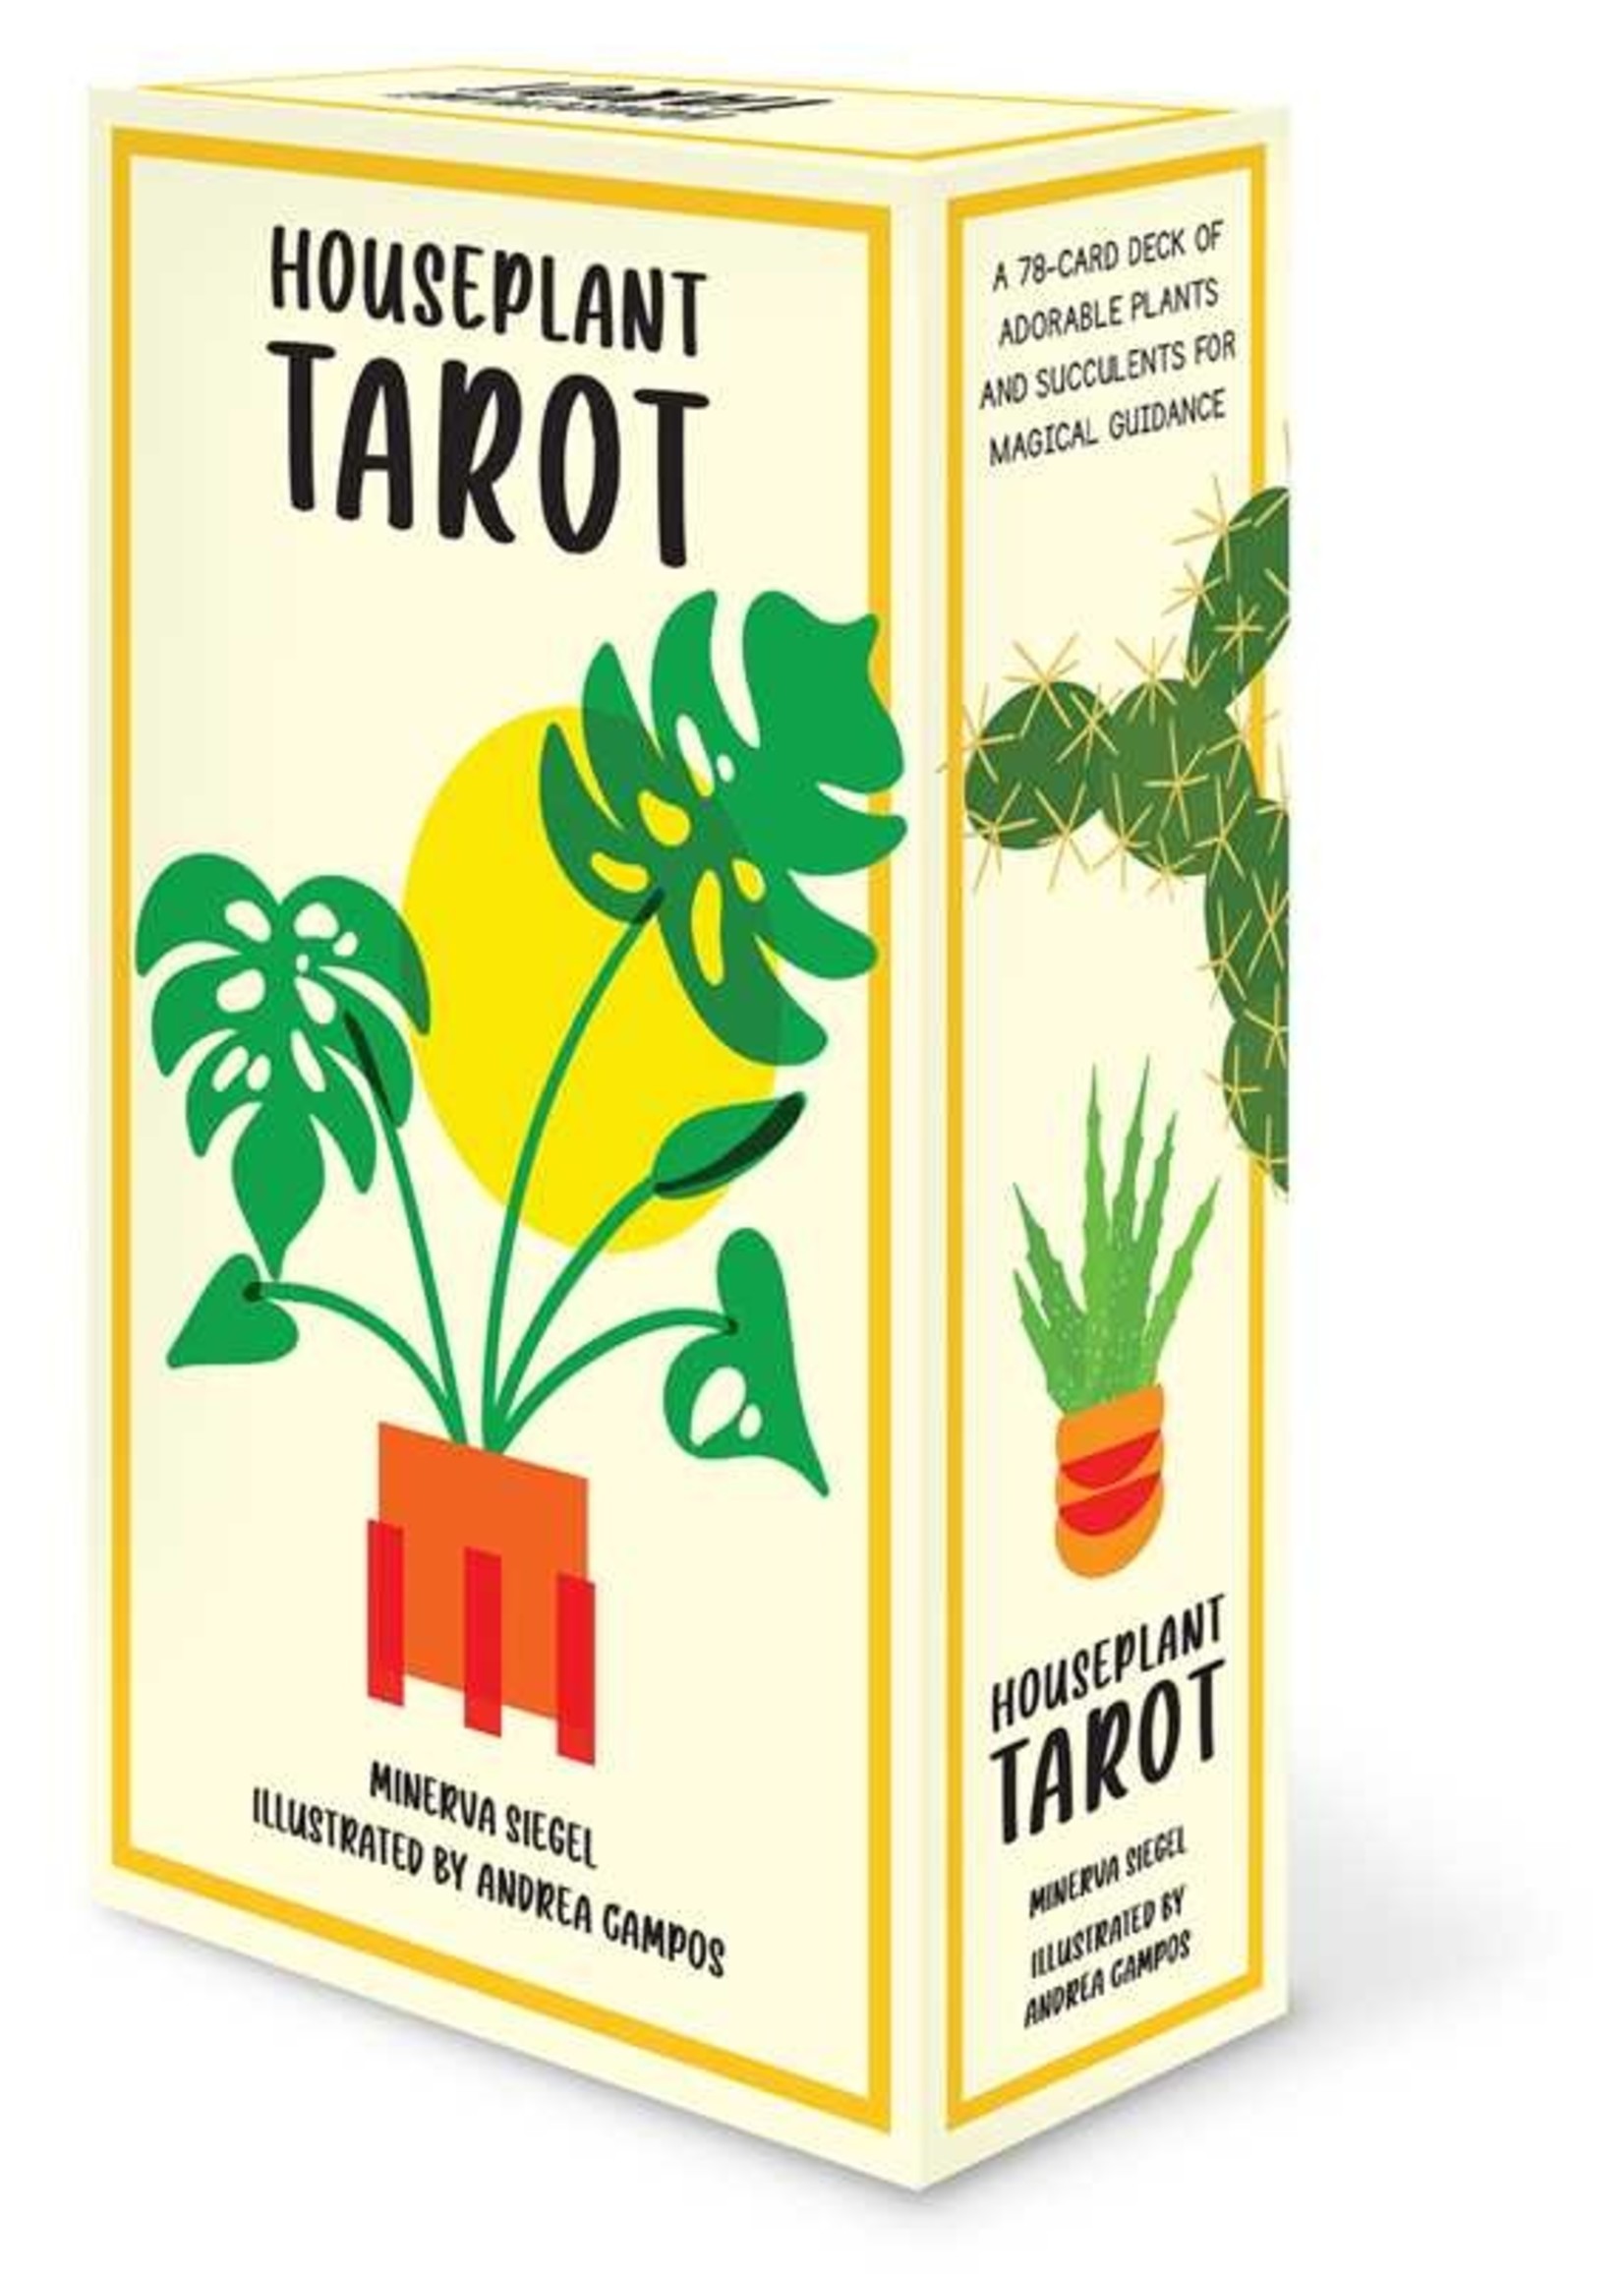 Houseplant Tarot: A 78-Card Deck of Adorable Plants and Succulents for Magical Guidance by Minerva Siegel